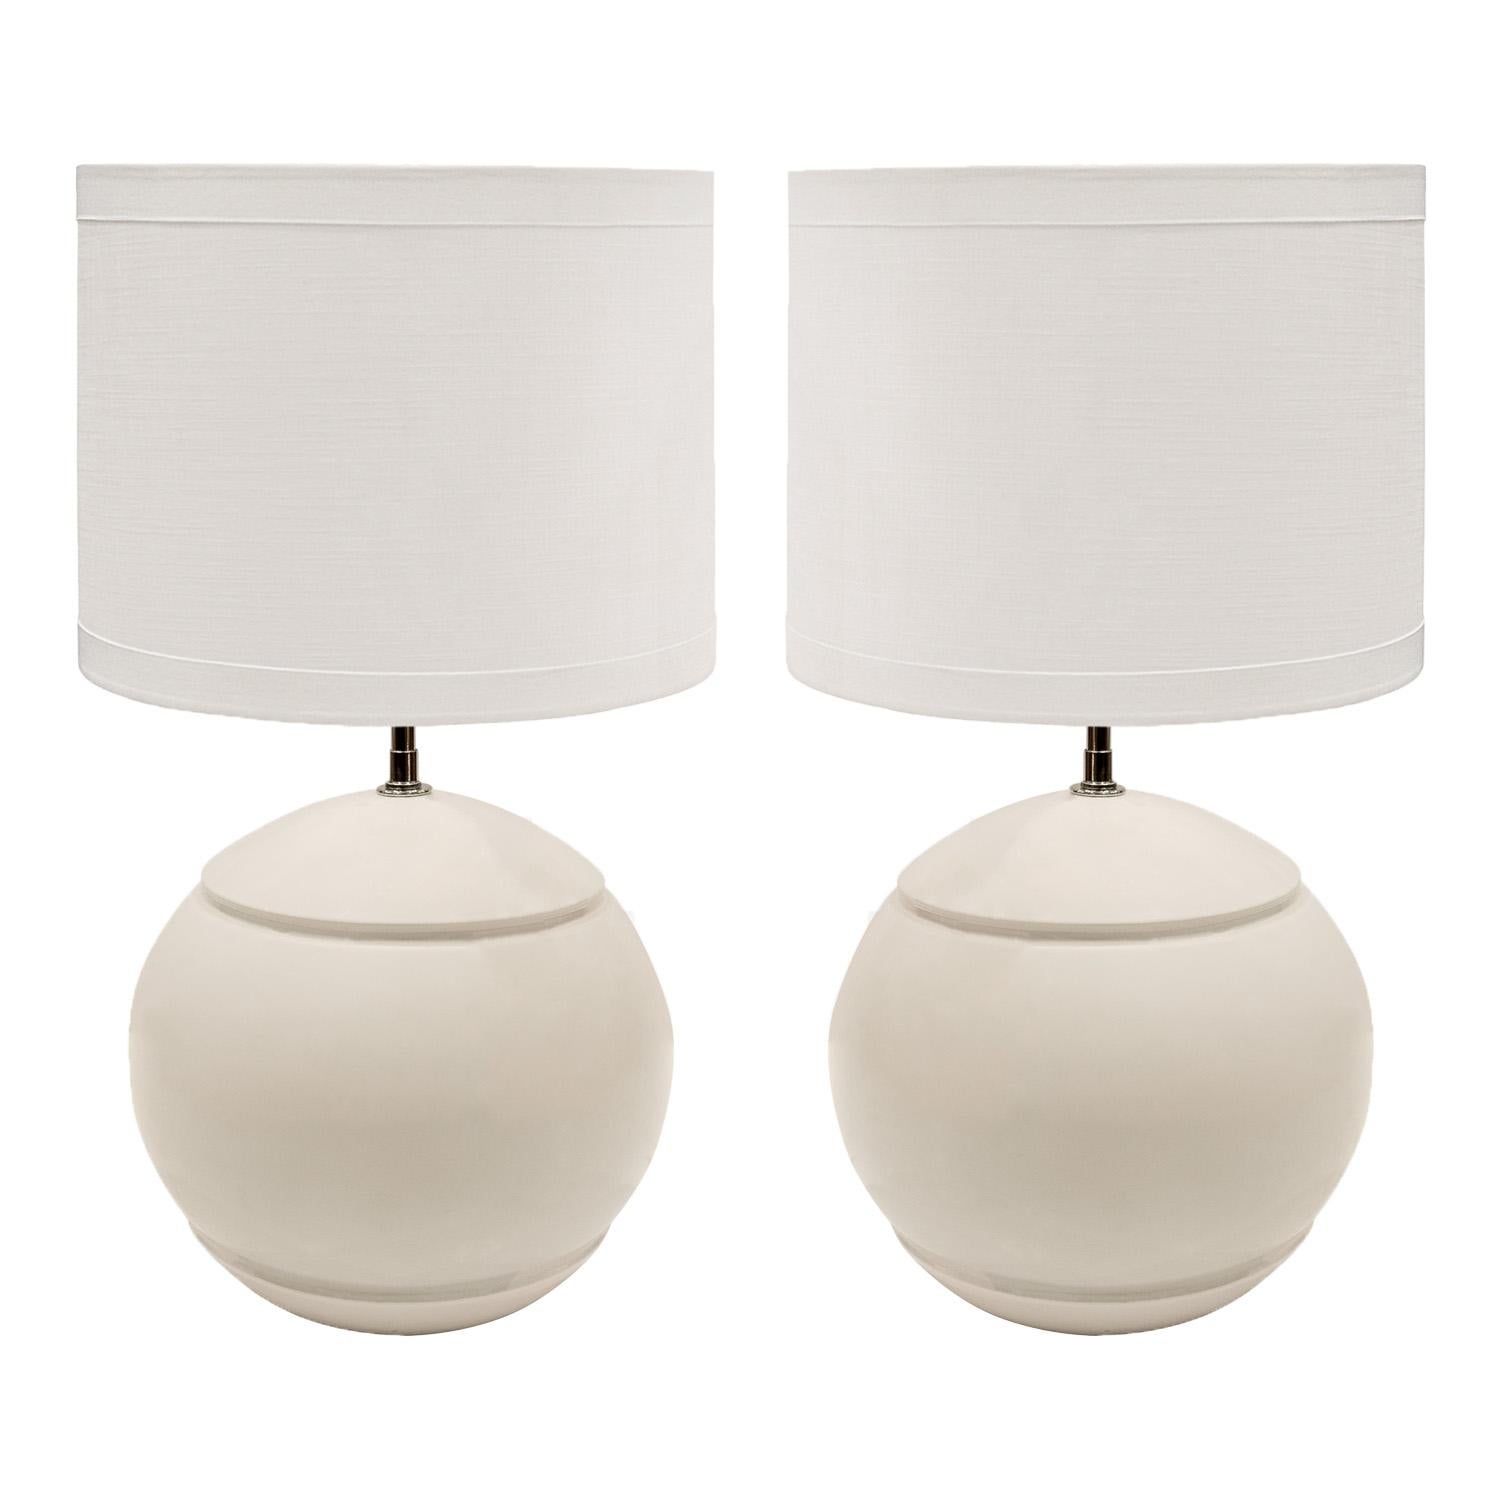 Artisan made white ceramic table lamps, orbs with reveals at top and bottom, with chrome fittings and sockets and silk cords, American 1970's. These lamps are simple yet elegant. Chrome hardware has been polished and replated by Lobel Modern. Newly